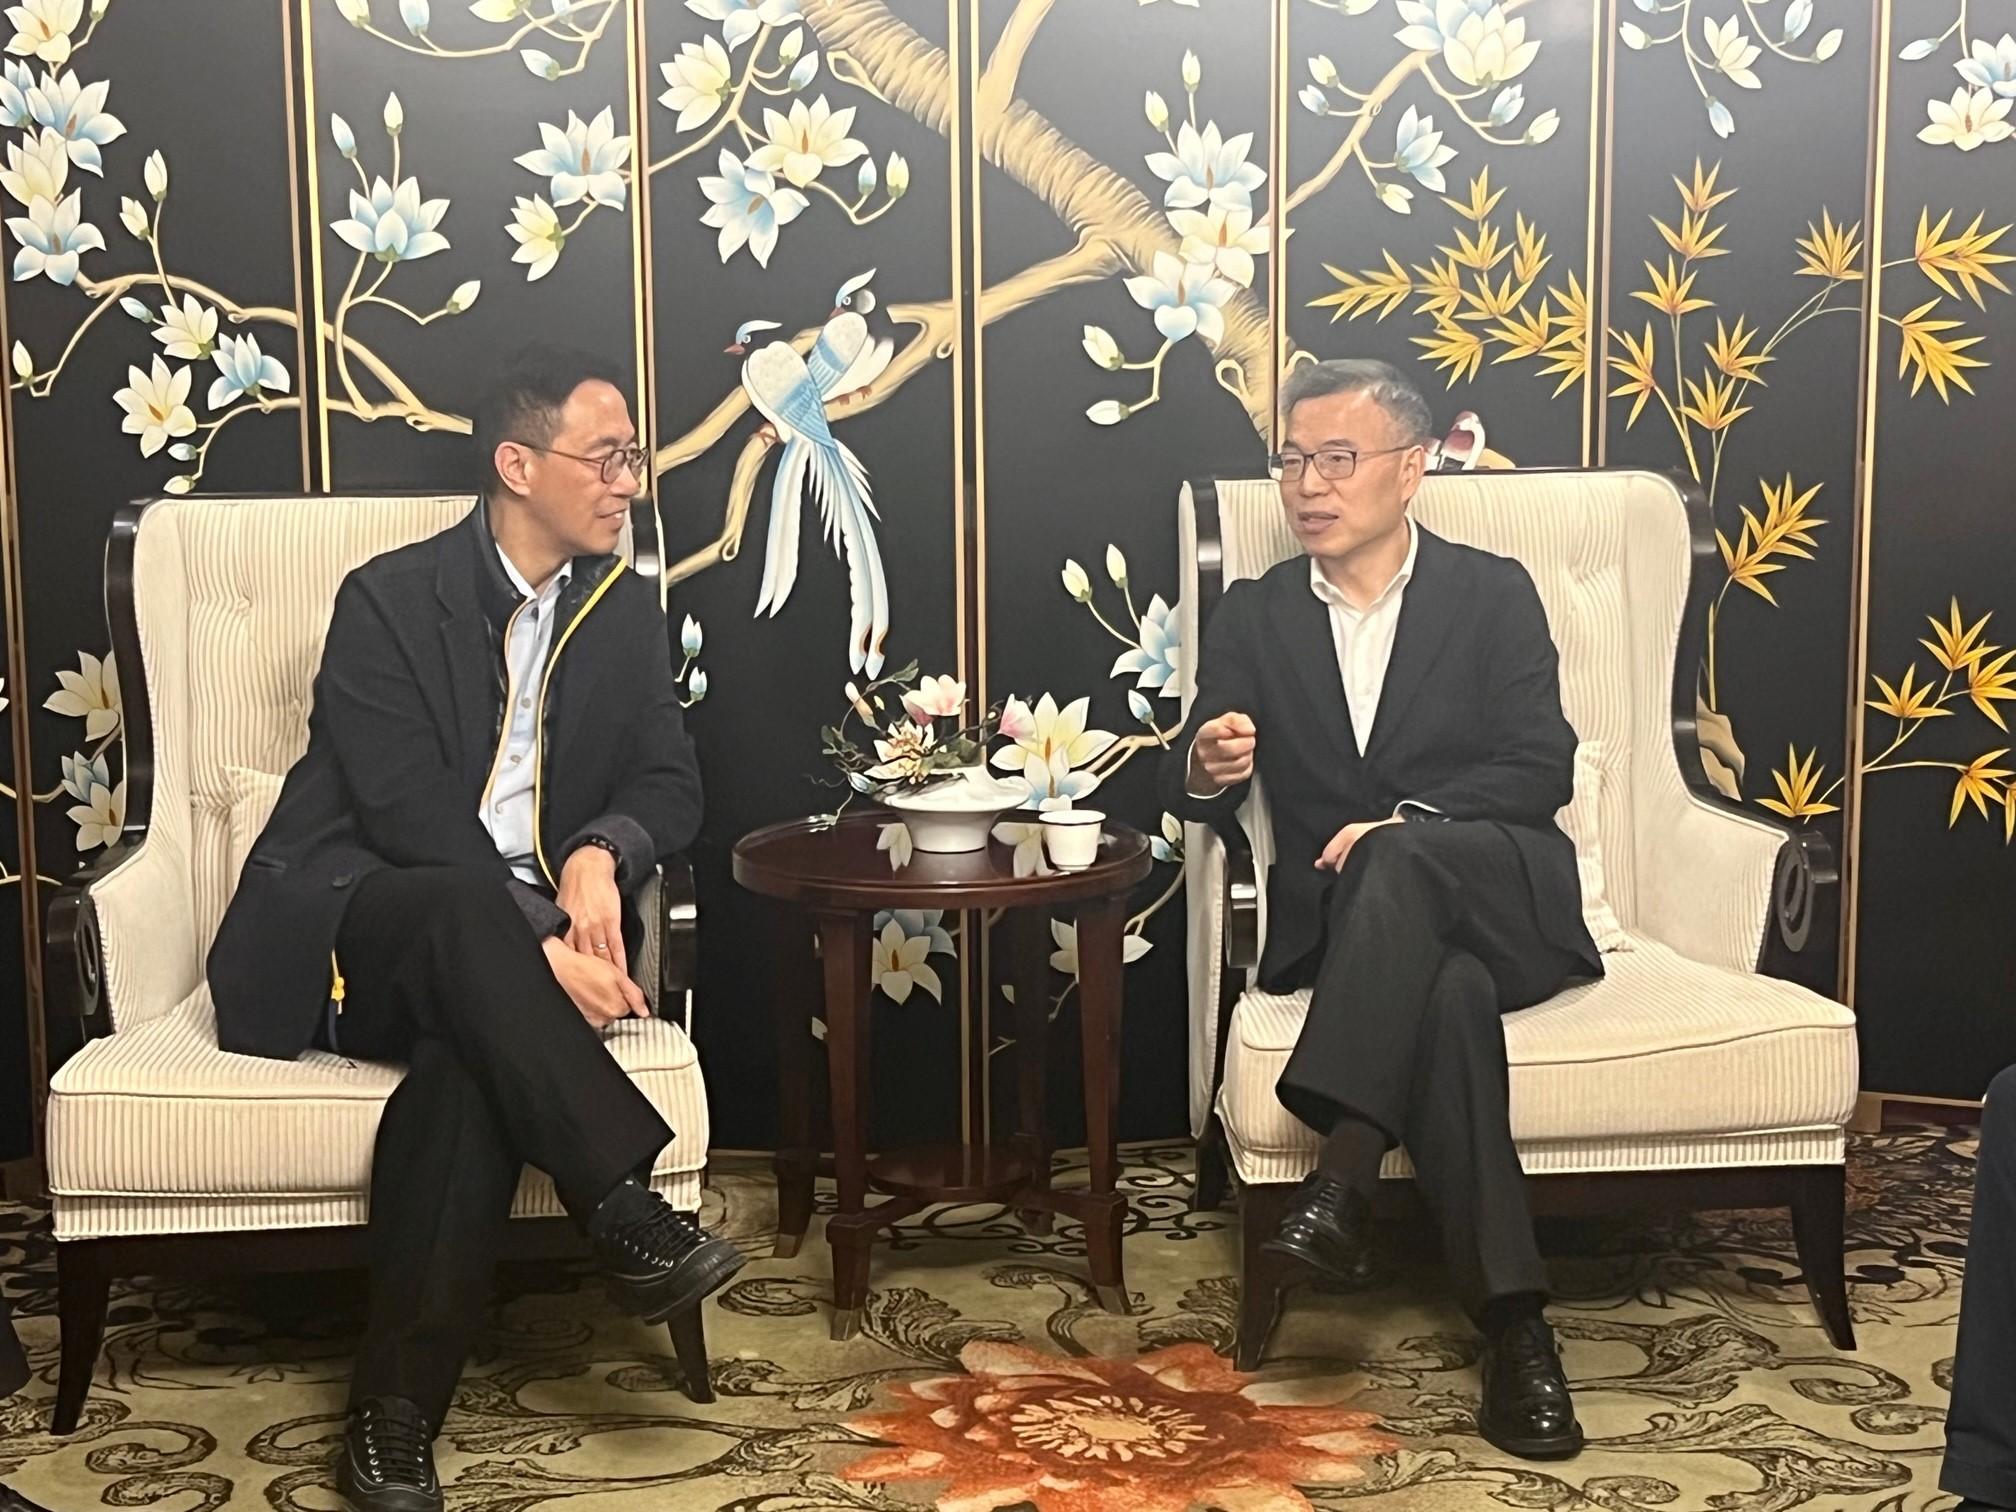 The Secretary for Culture, Sports and Tourism, Mr Kevin Yeung (left), meets with the Director General of the Shanghai Municipal Administration of Culture and Tourism, Mr Fang Shizhong (right), in Shanghai today (January 8) to exchange views on cultural and tourism development of the places.